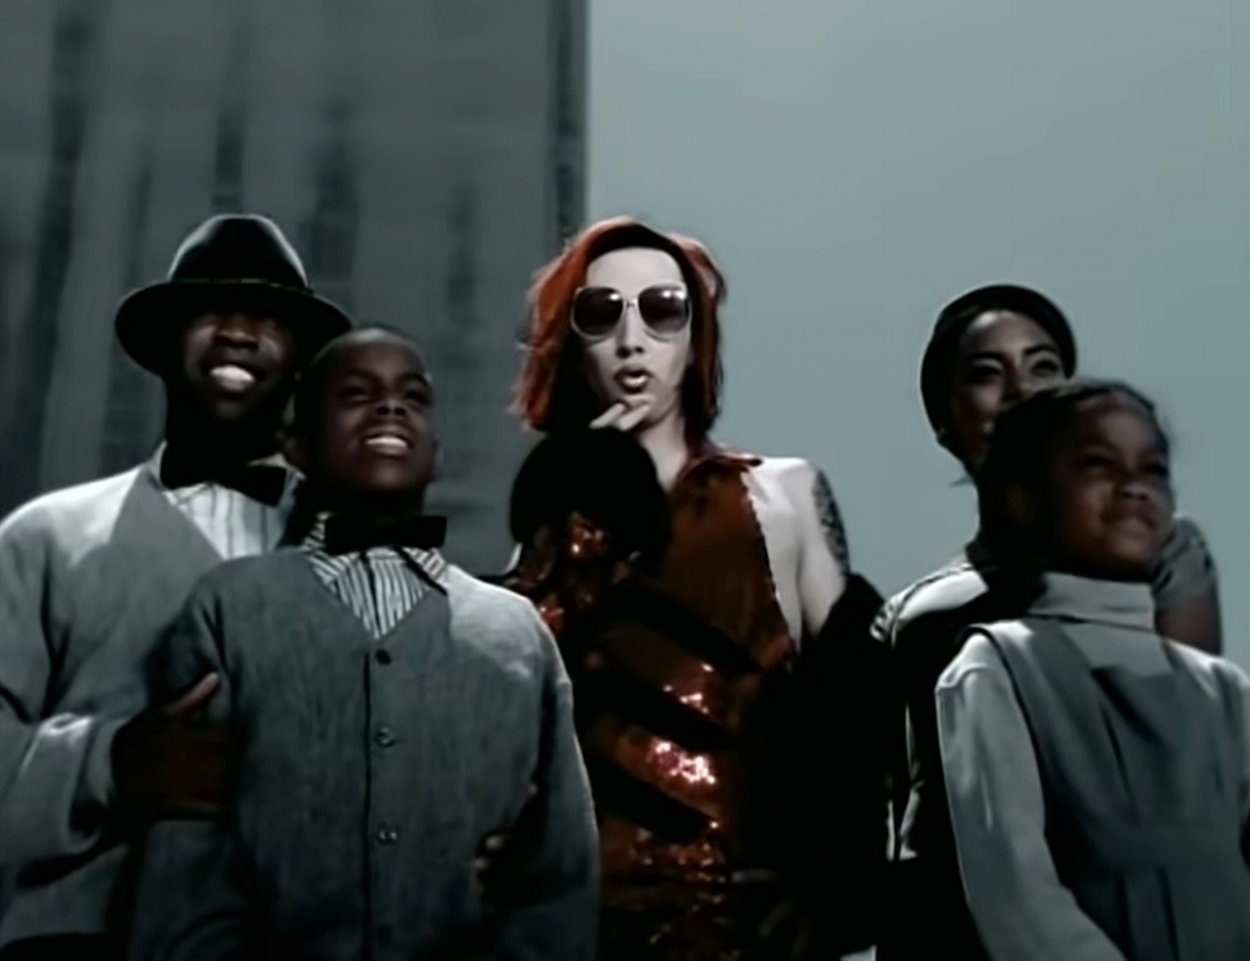 Marilyn Manson as an alien rock star posing for the camera, surrounded by people wearing grey clothes in "The Dope Show" music video